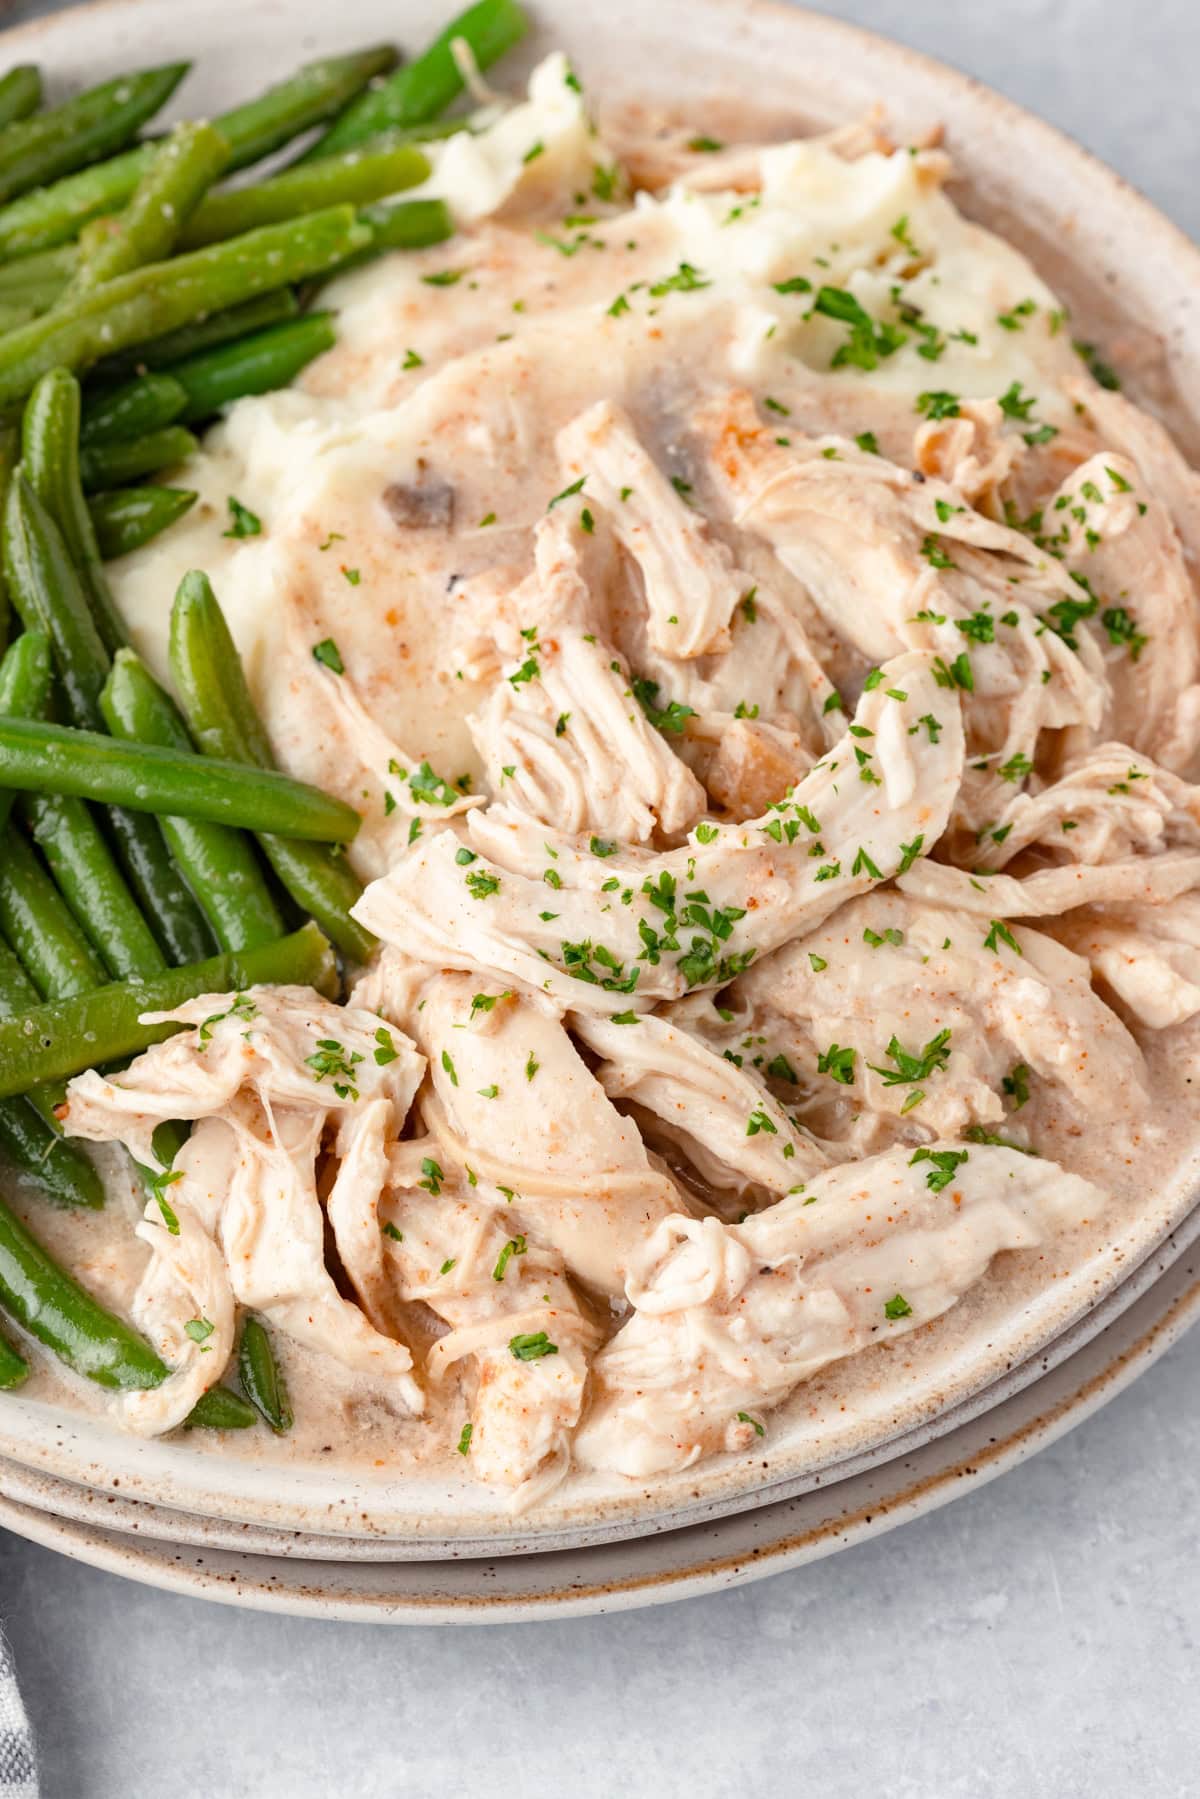 Shredded chicken and gravy on a plate with sides.